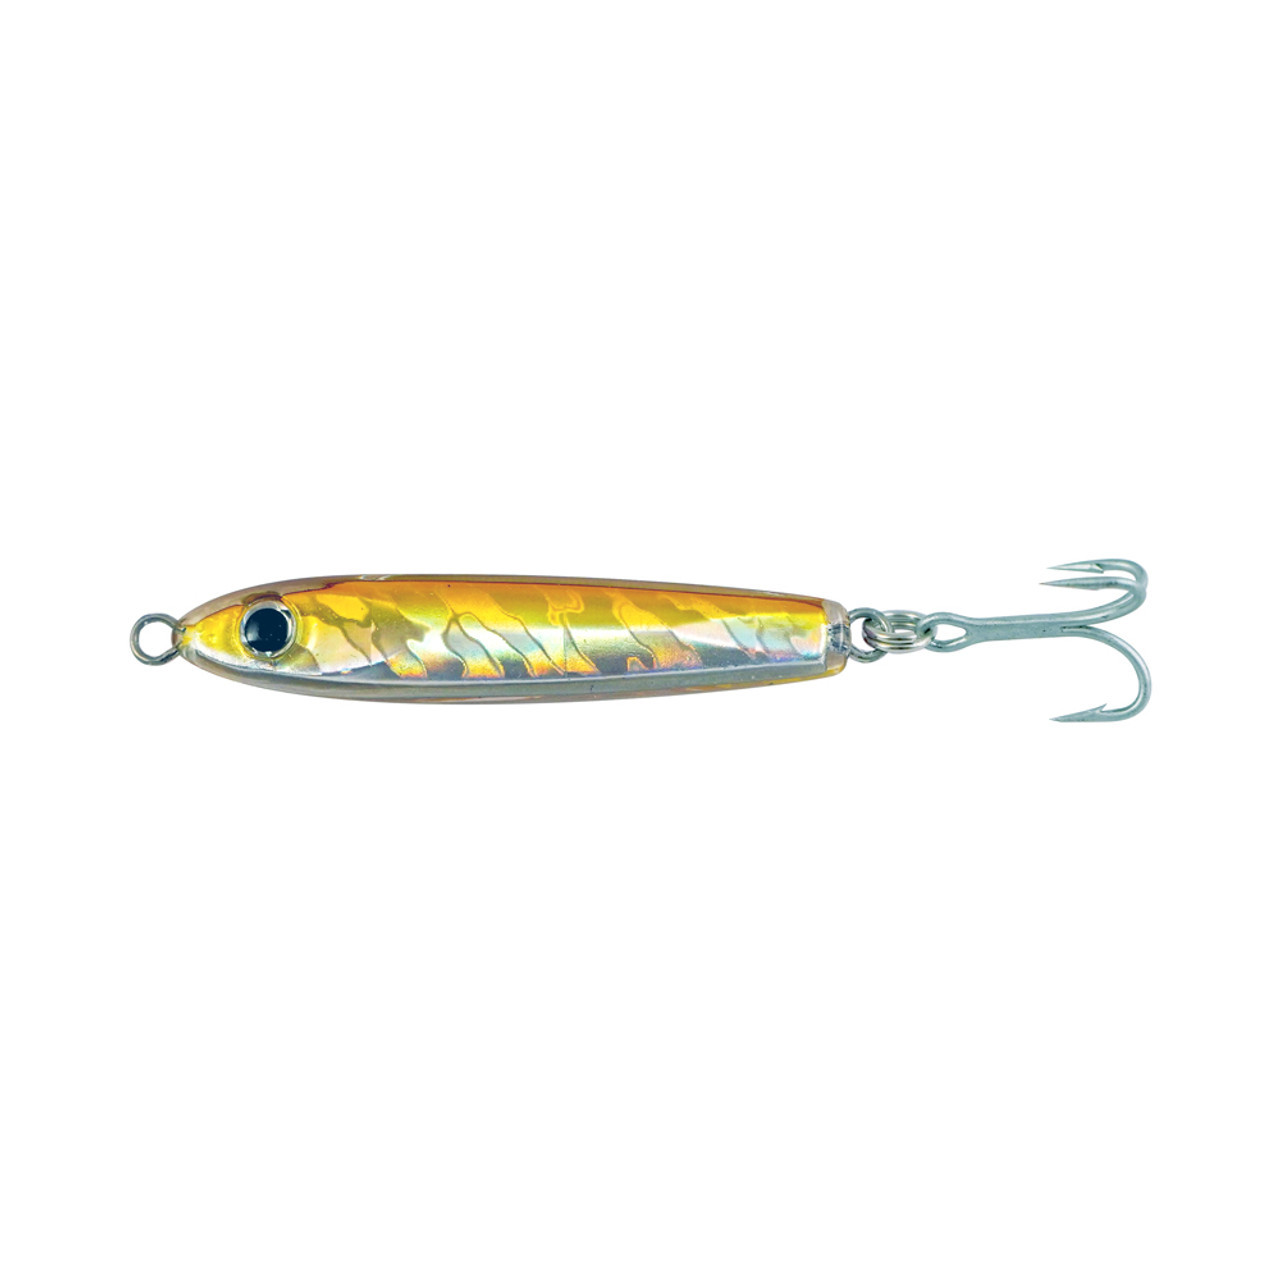 Game On Lures Exo Jigs Epoxy Resin 3" 1oz Gold Olive Sandeel